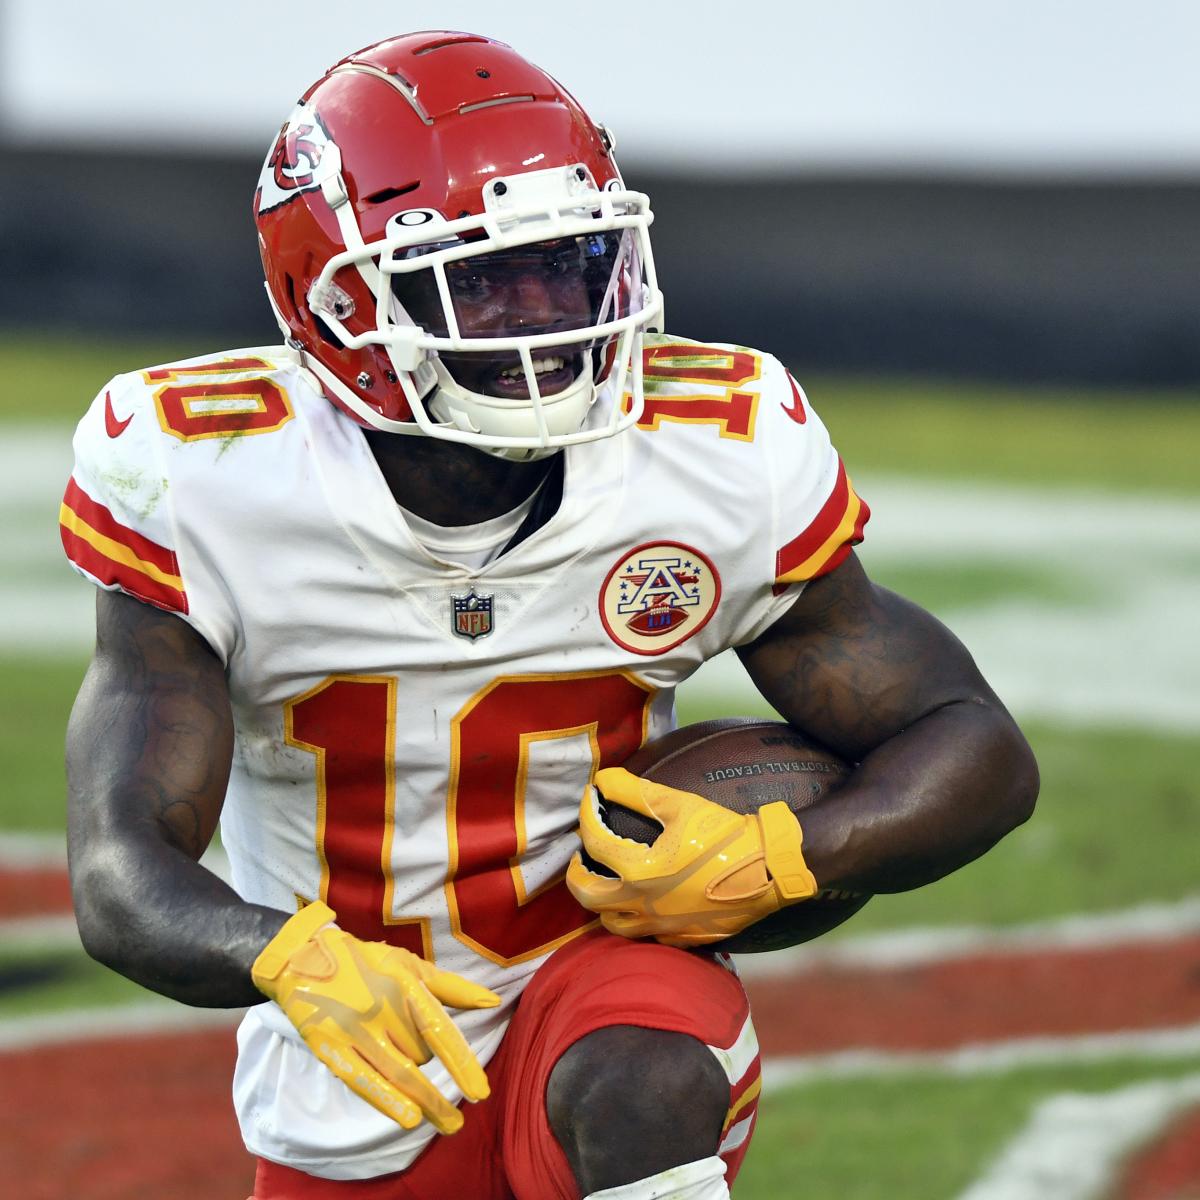 Ranking the NFL's Top 7 Wide Receivers Heading into 2021 Offseason